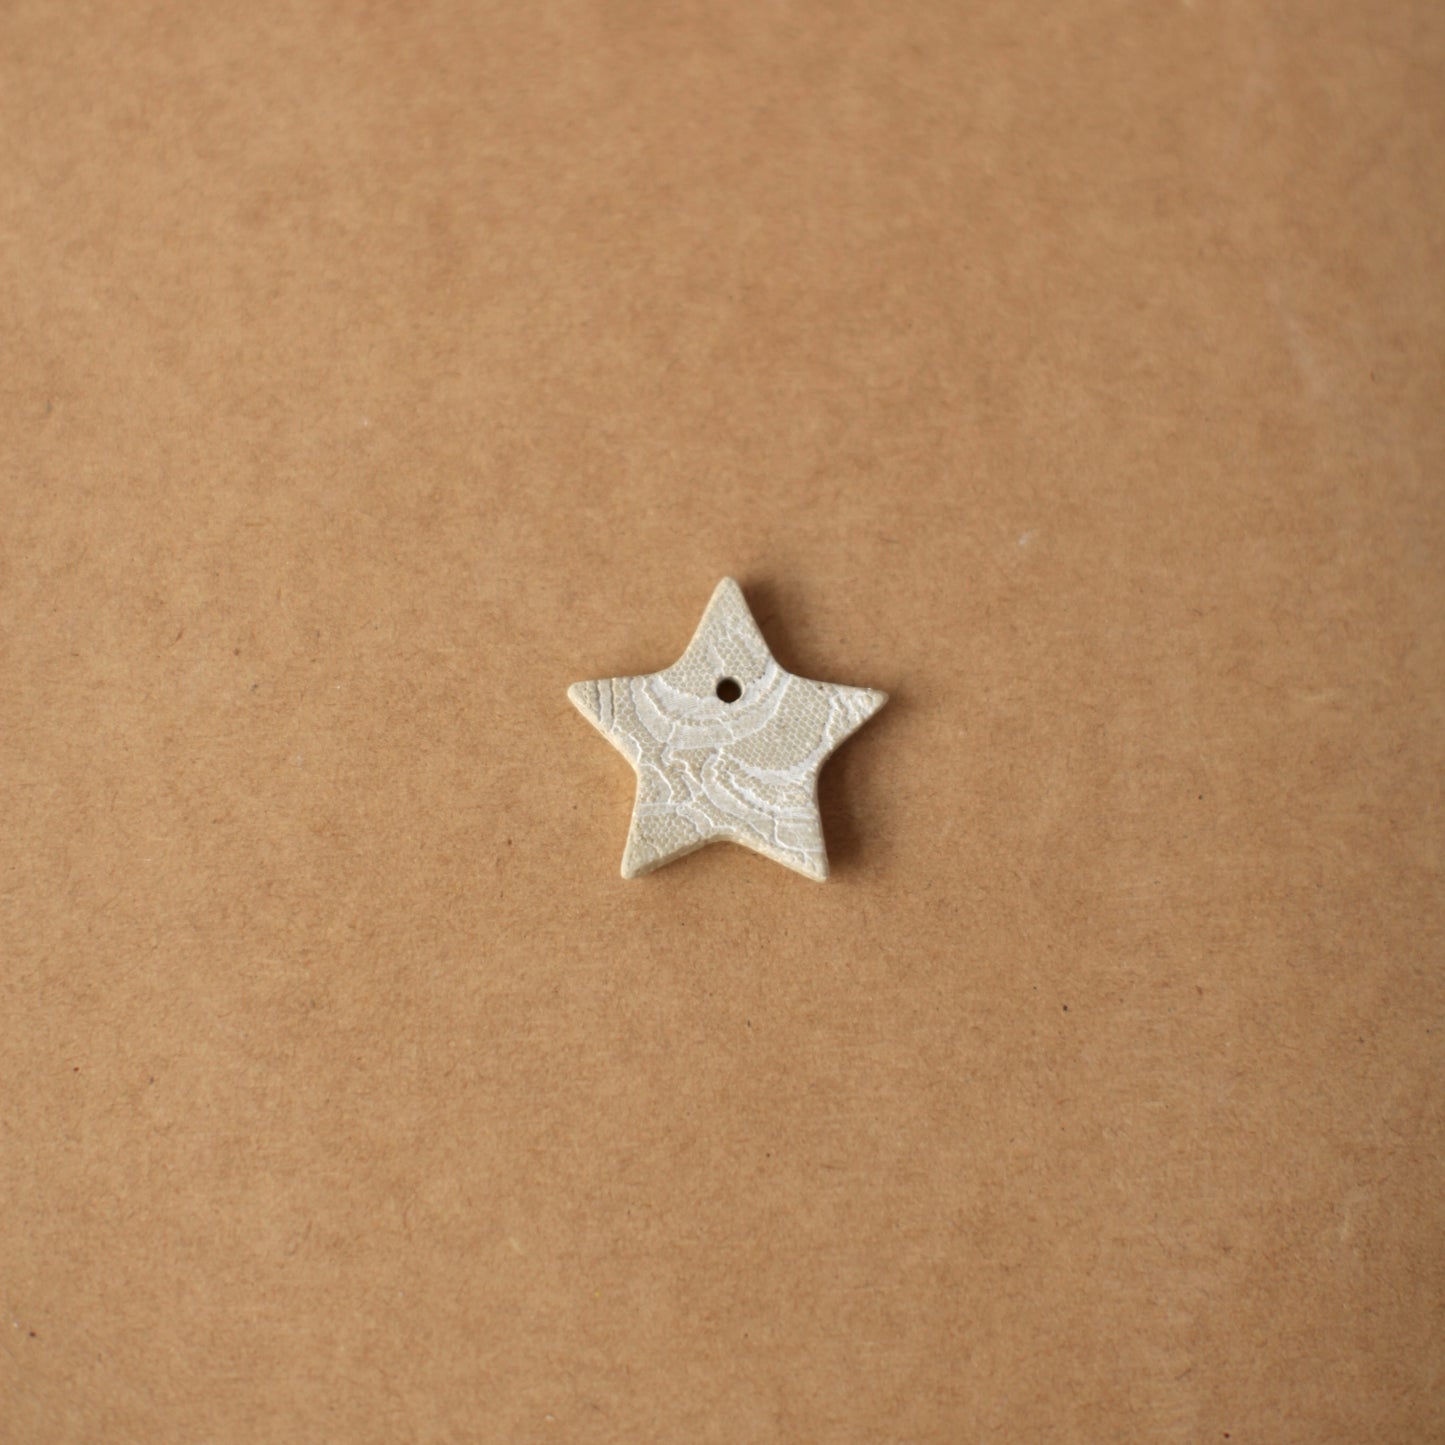 Pressed Lace Star Christmas Ornament